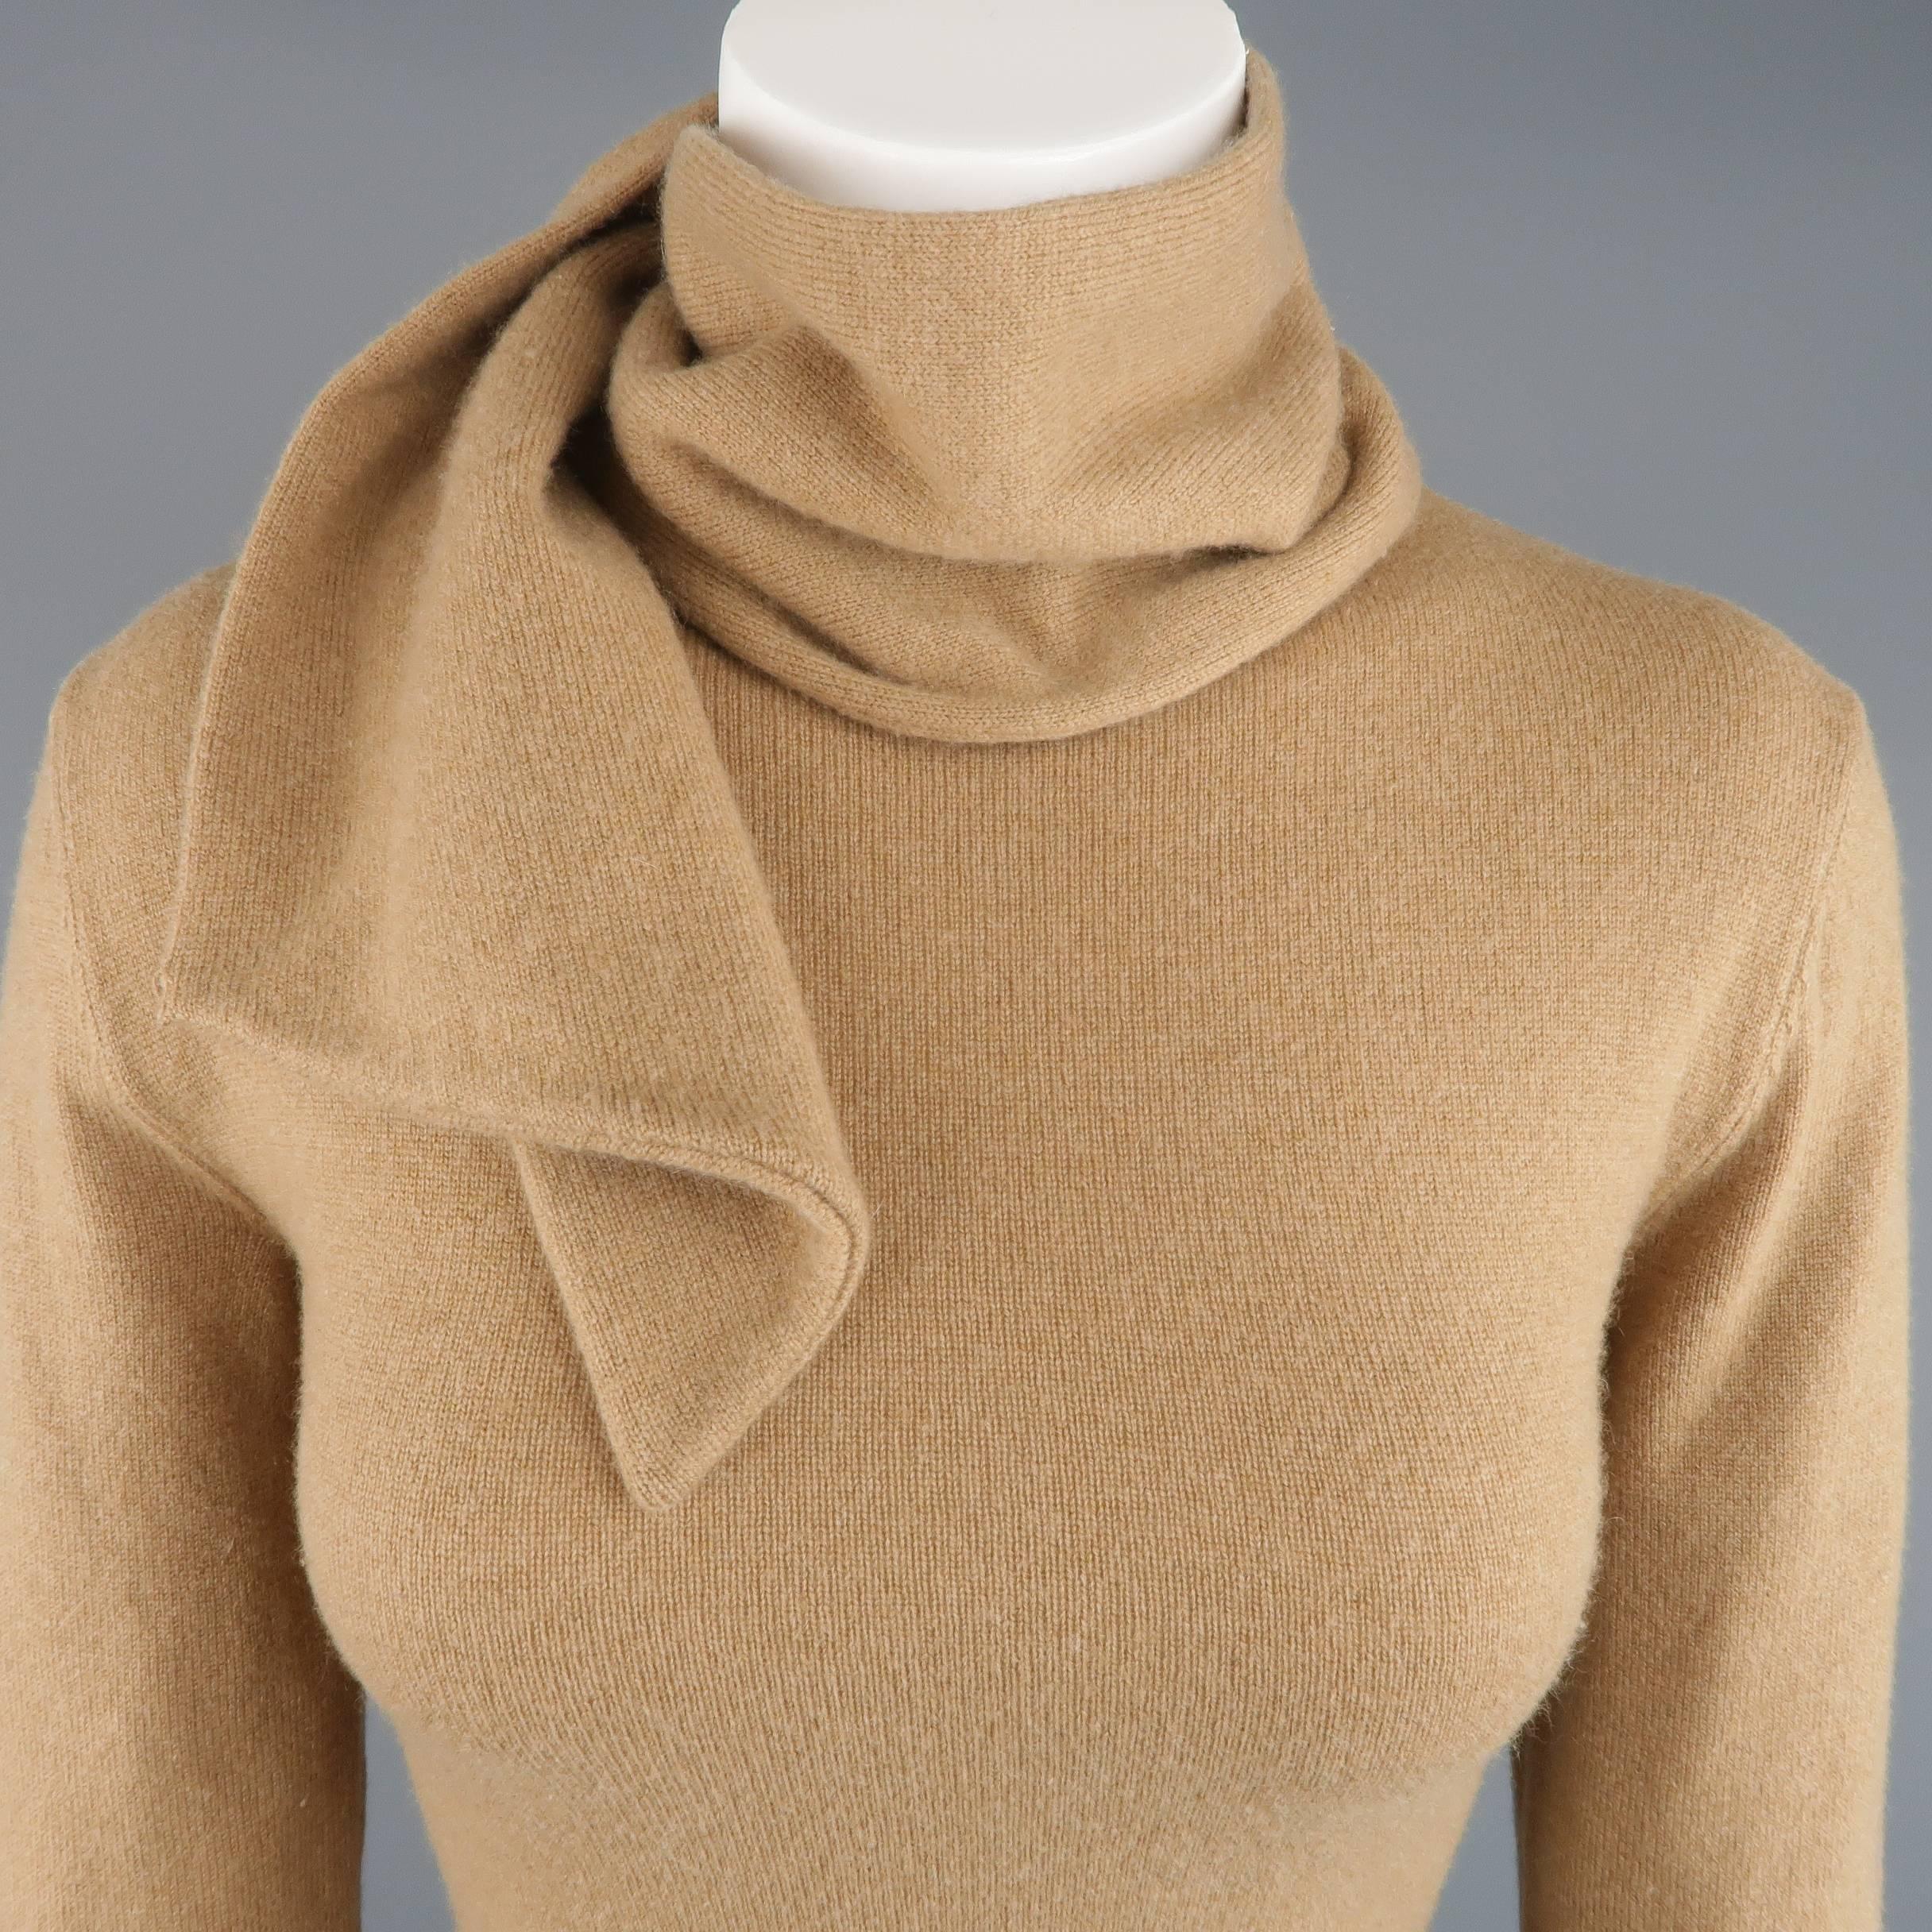 RALPH LAUREN Collection Size M Camel Cashmere Scarf Neck Pullover Sweater 1